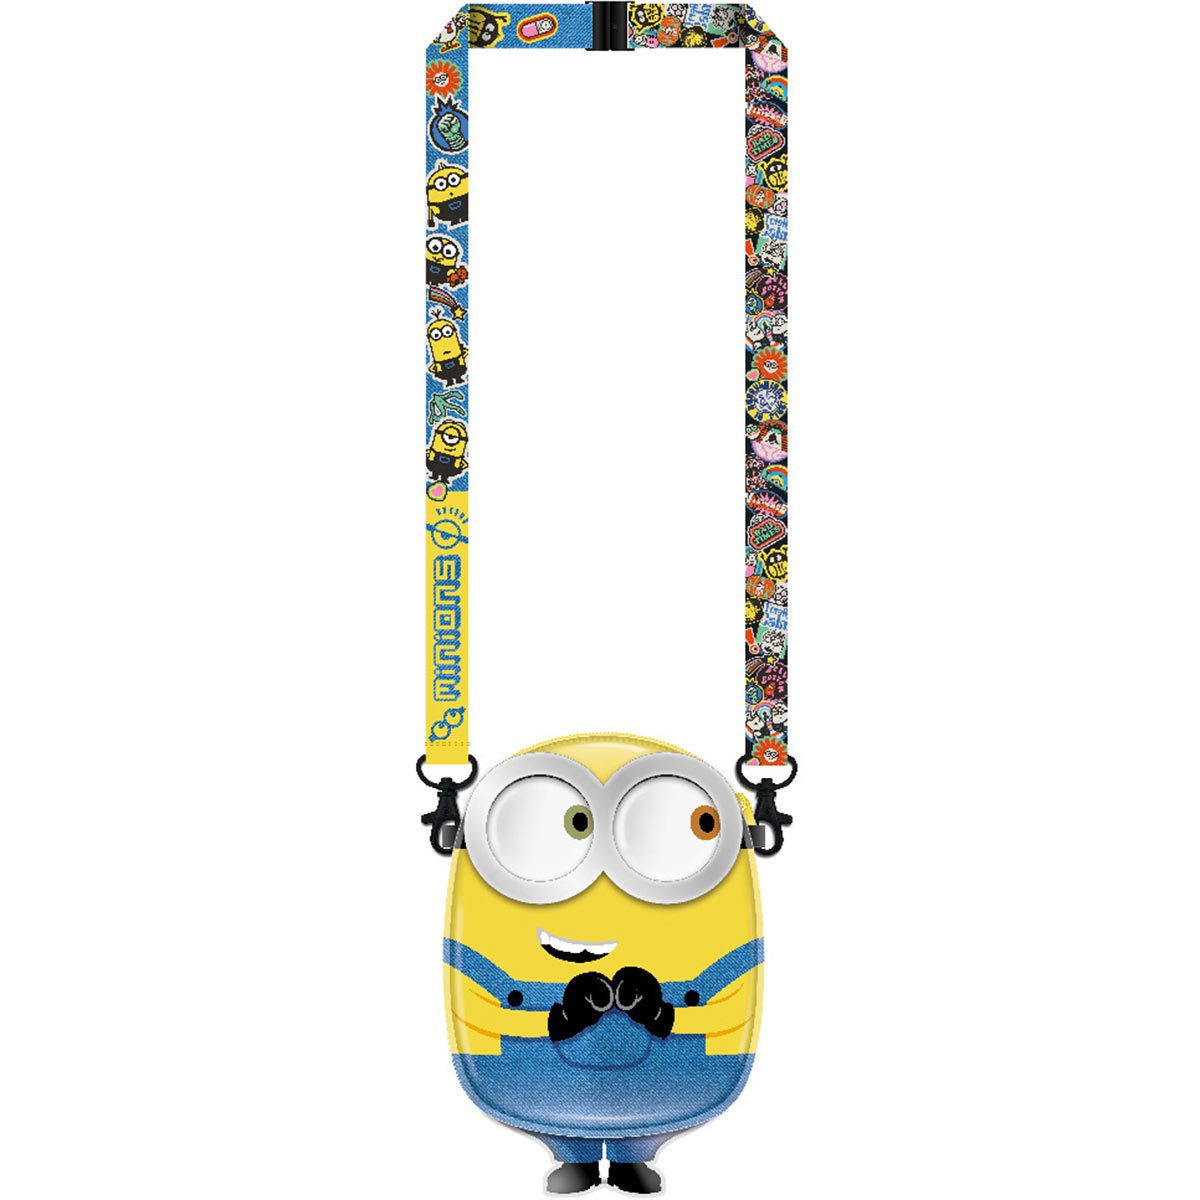 Minions Lanyard with Retractable Card Holder